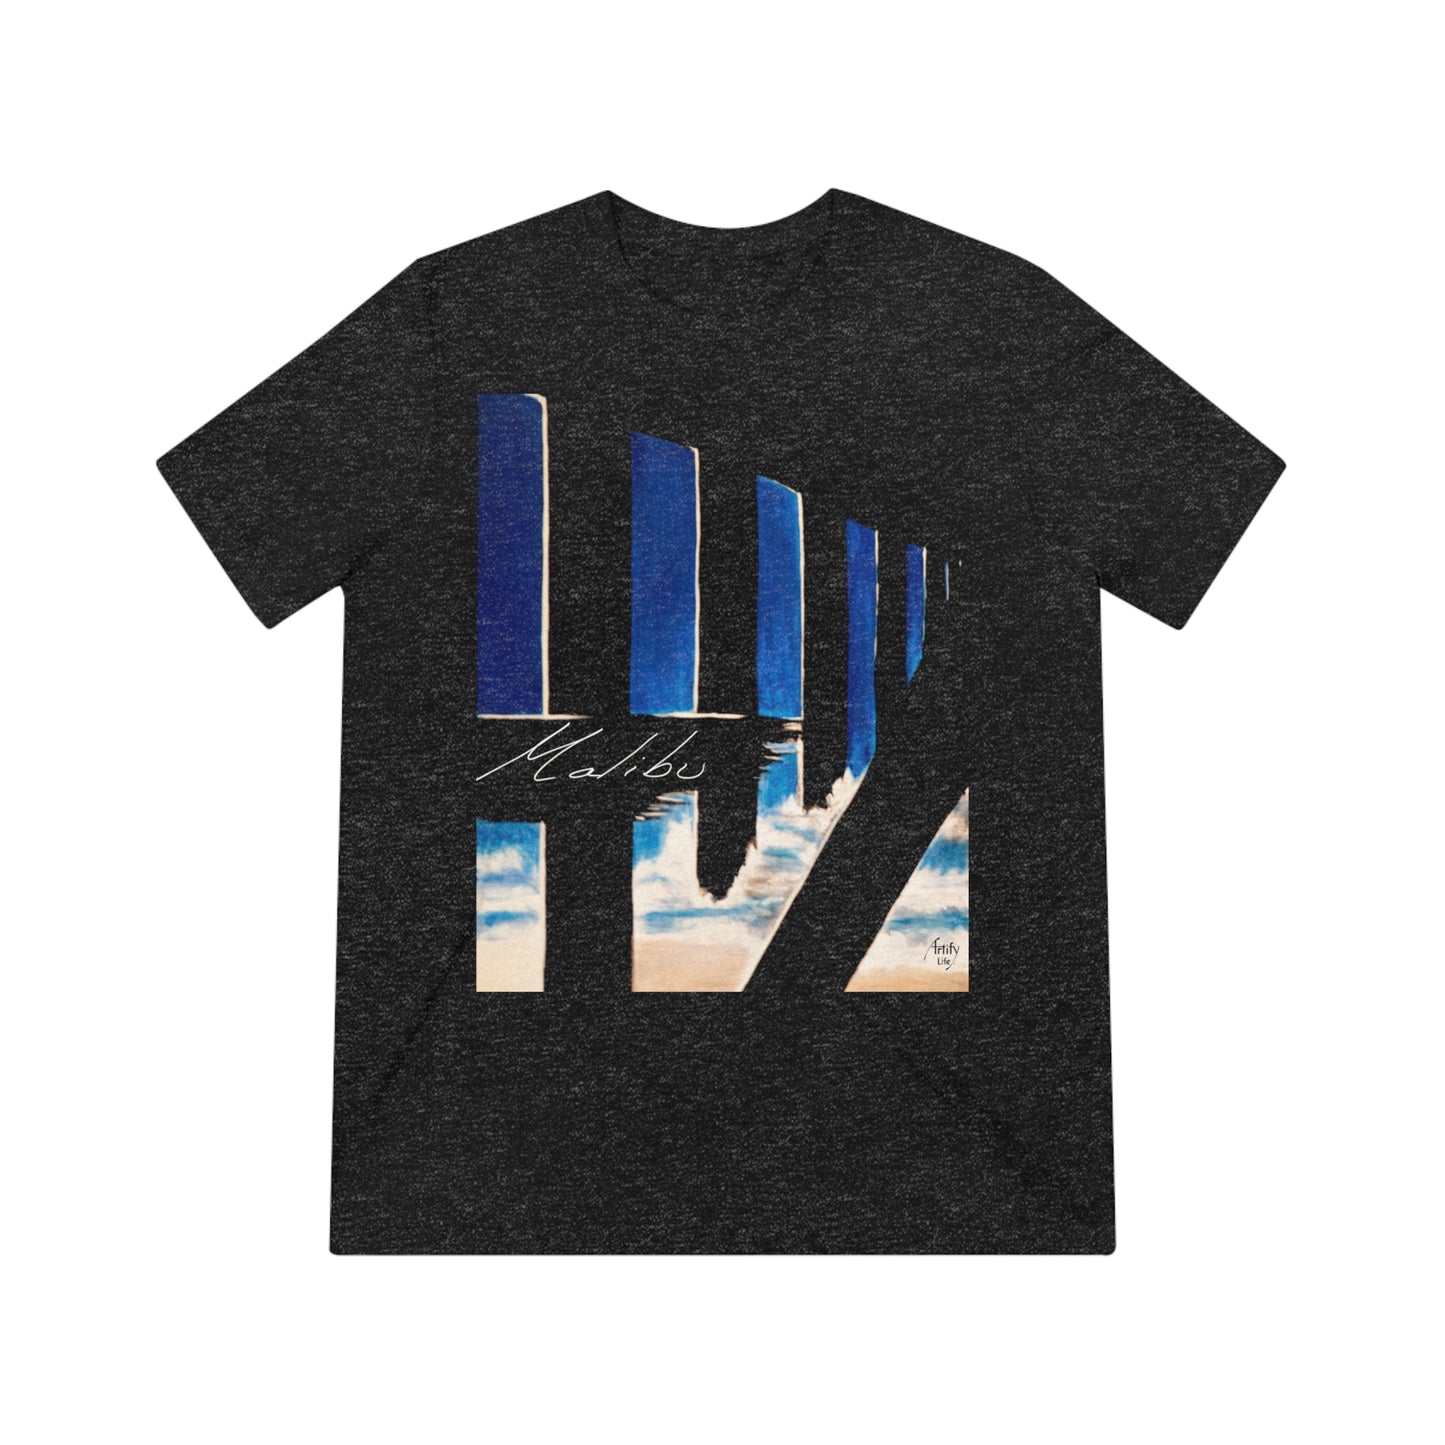 MALIBU PIER Unisex Triblend Tee in Black Heather Featuring Original Oil Painting by Katina Zinner